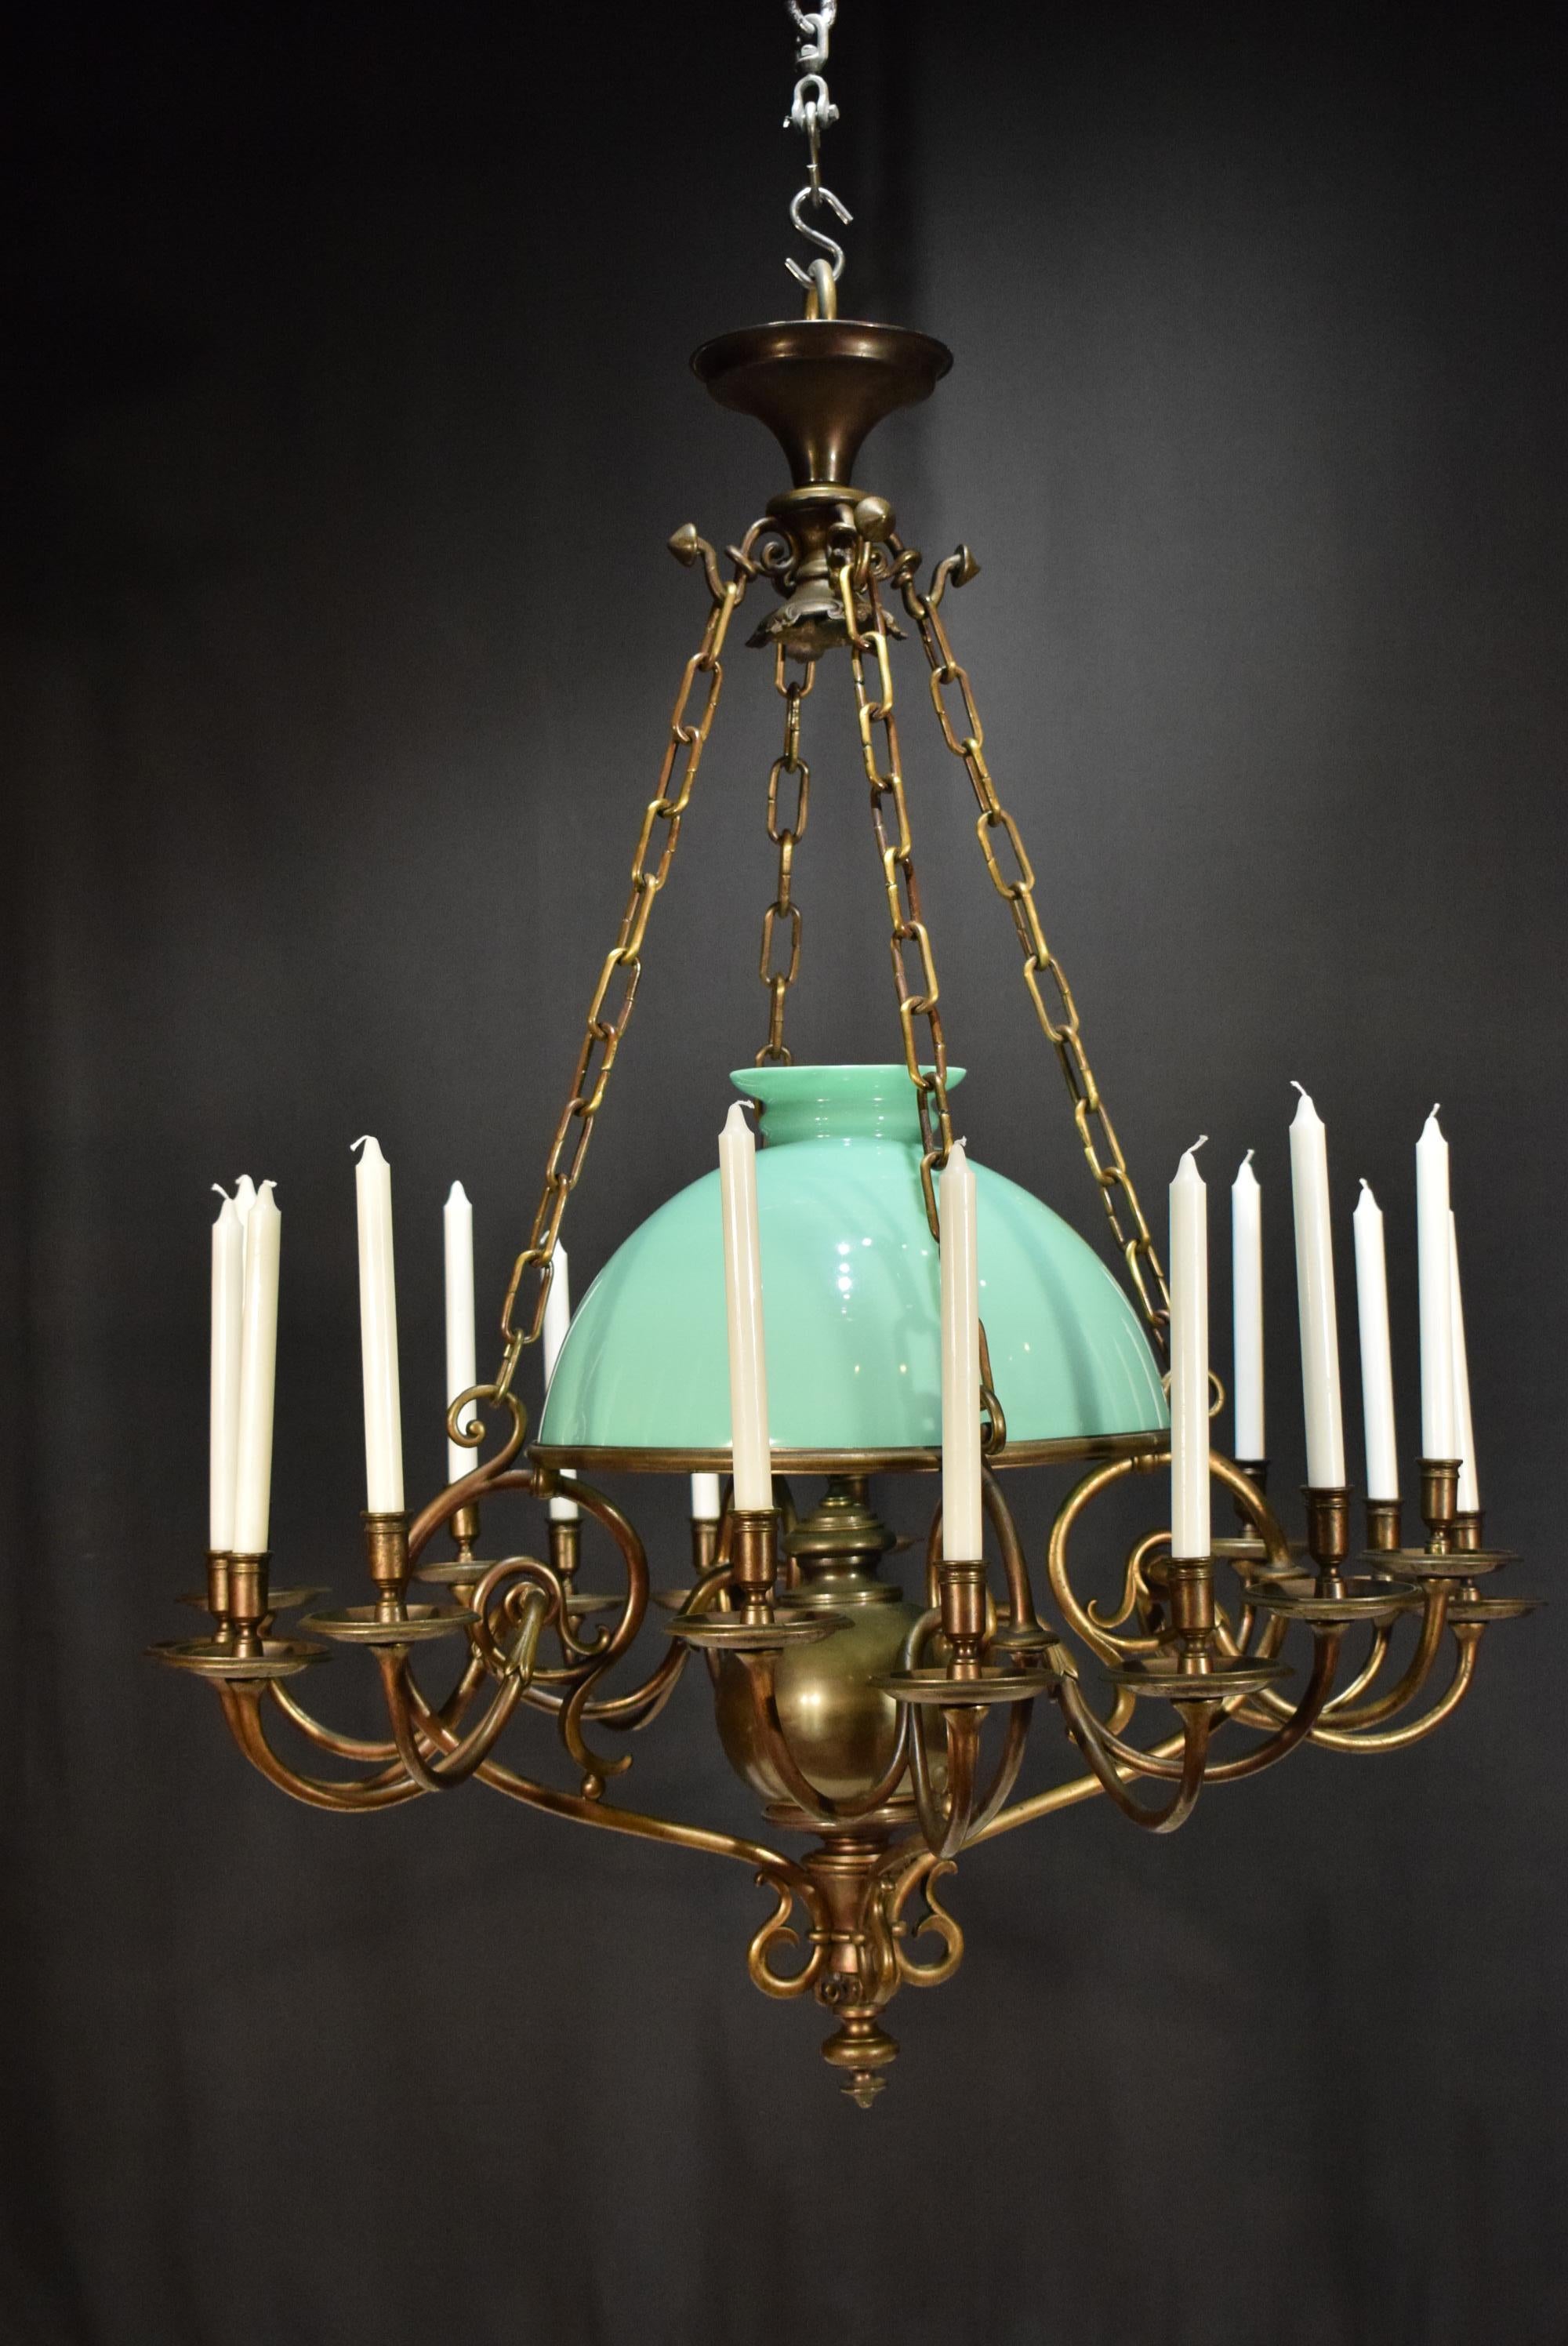 A very fine bronze chandelier with its original pale green shade. Originally for candles, has never been ever electrified. From a hunting lodge in Austria, circa 1900. A rare find.
Dimensions: Height 51